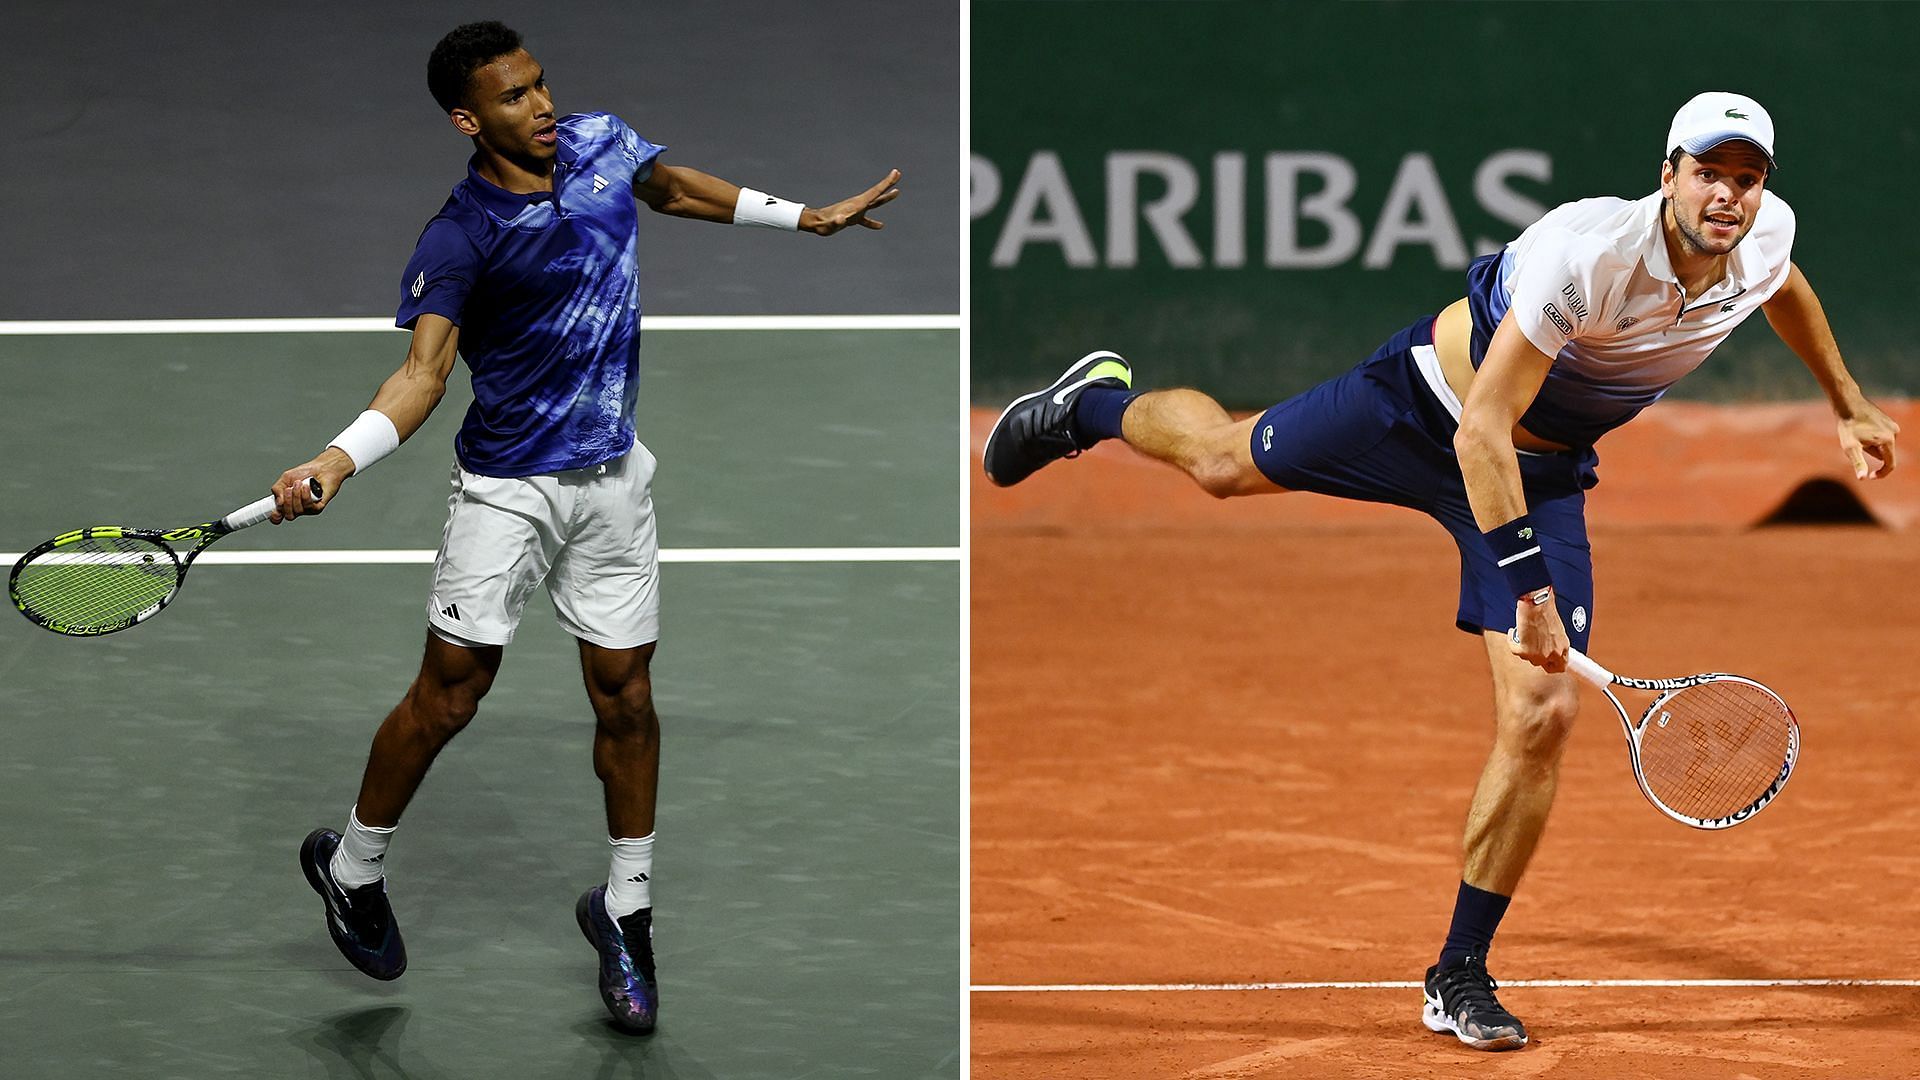 Felix Auger-Aliassime will take on Gregoire Barrere in the second round of the ABN AMRO Rotterdam Open 